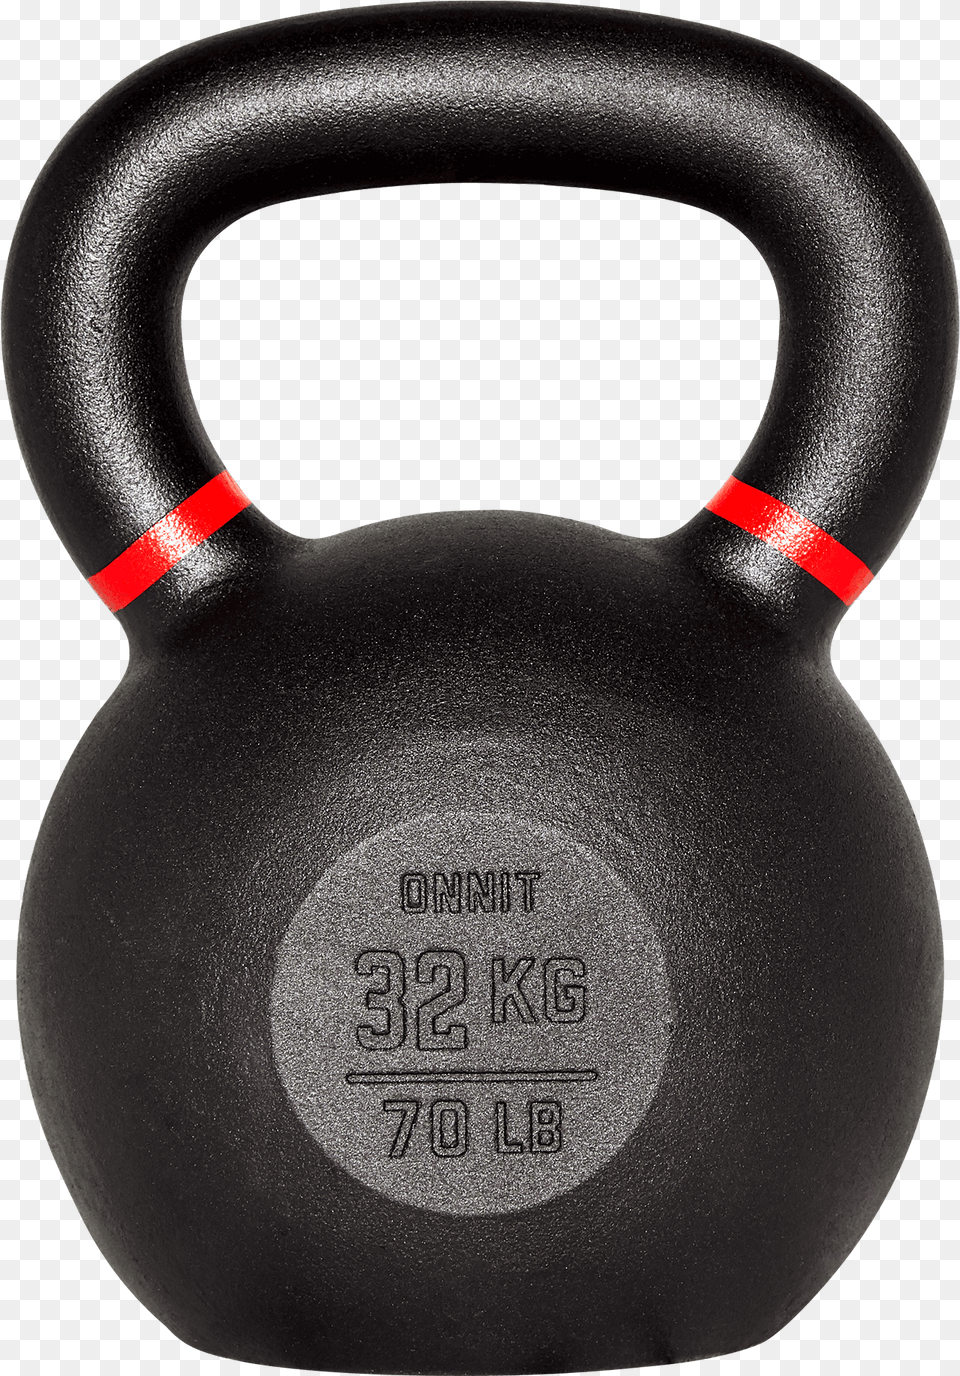 Onnit Kettlebell Kettlebell, Smoke Pipe, Fitness, Gym, Gym Weights Png